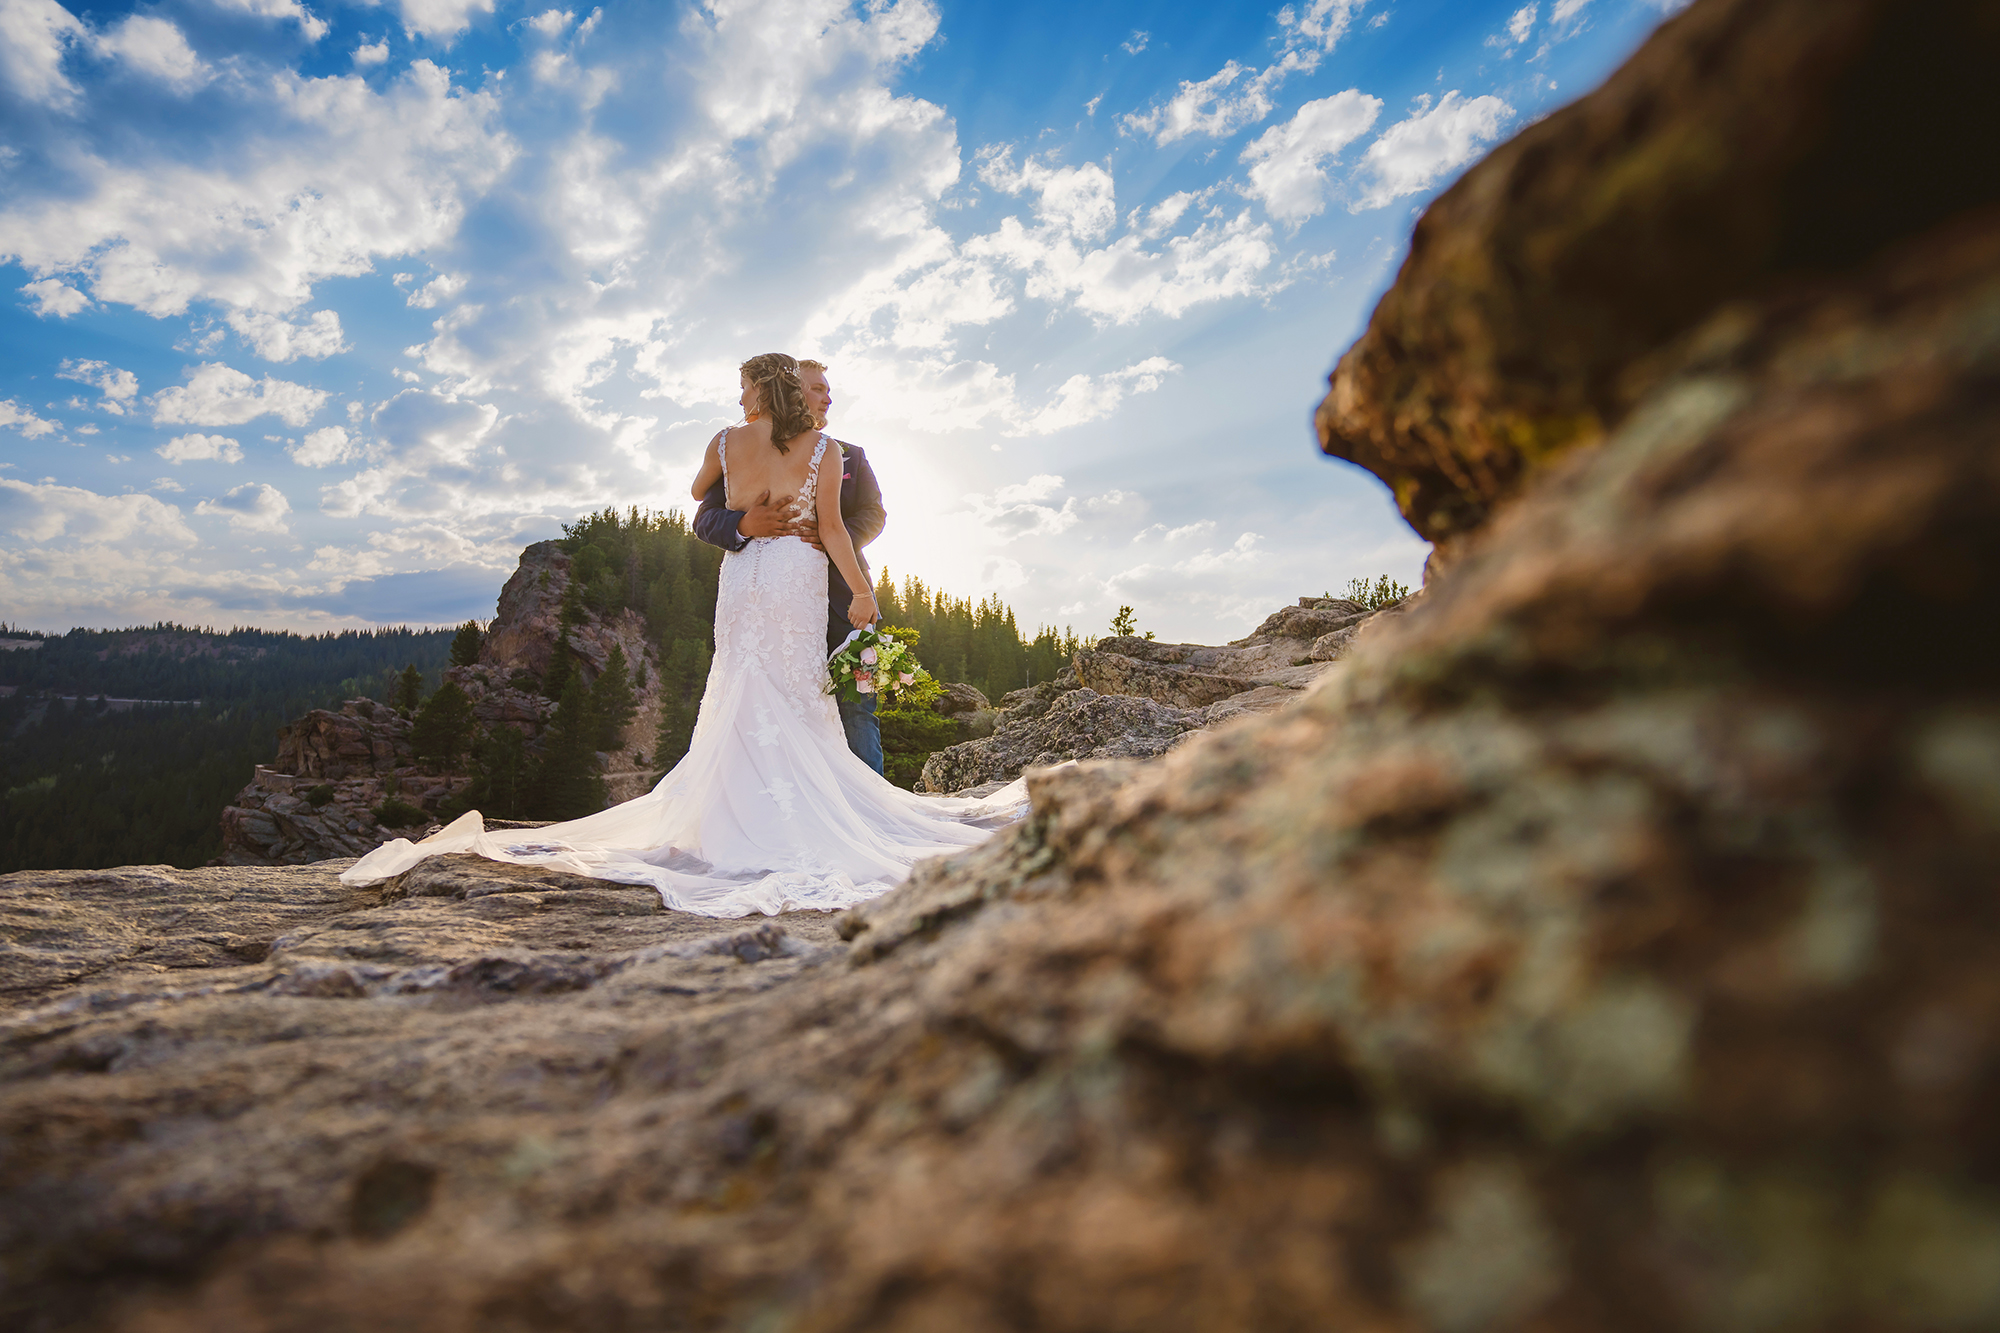 Colorado elopement photographer captures a bride in a low-back dress embracing her groom on a mountain top